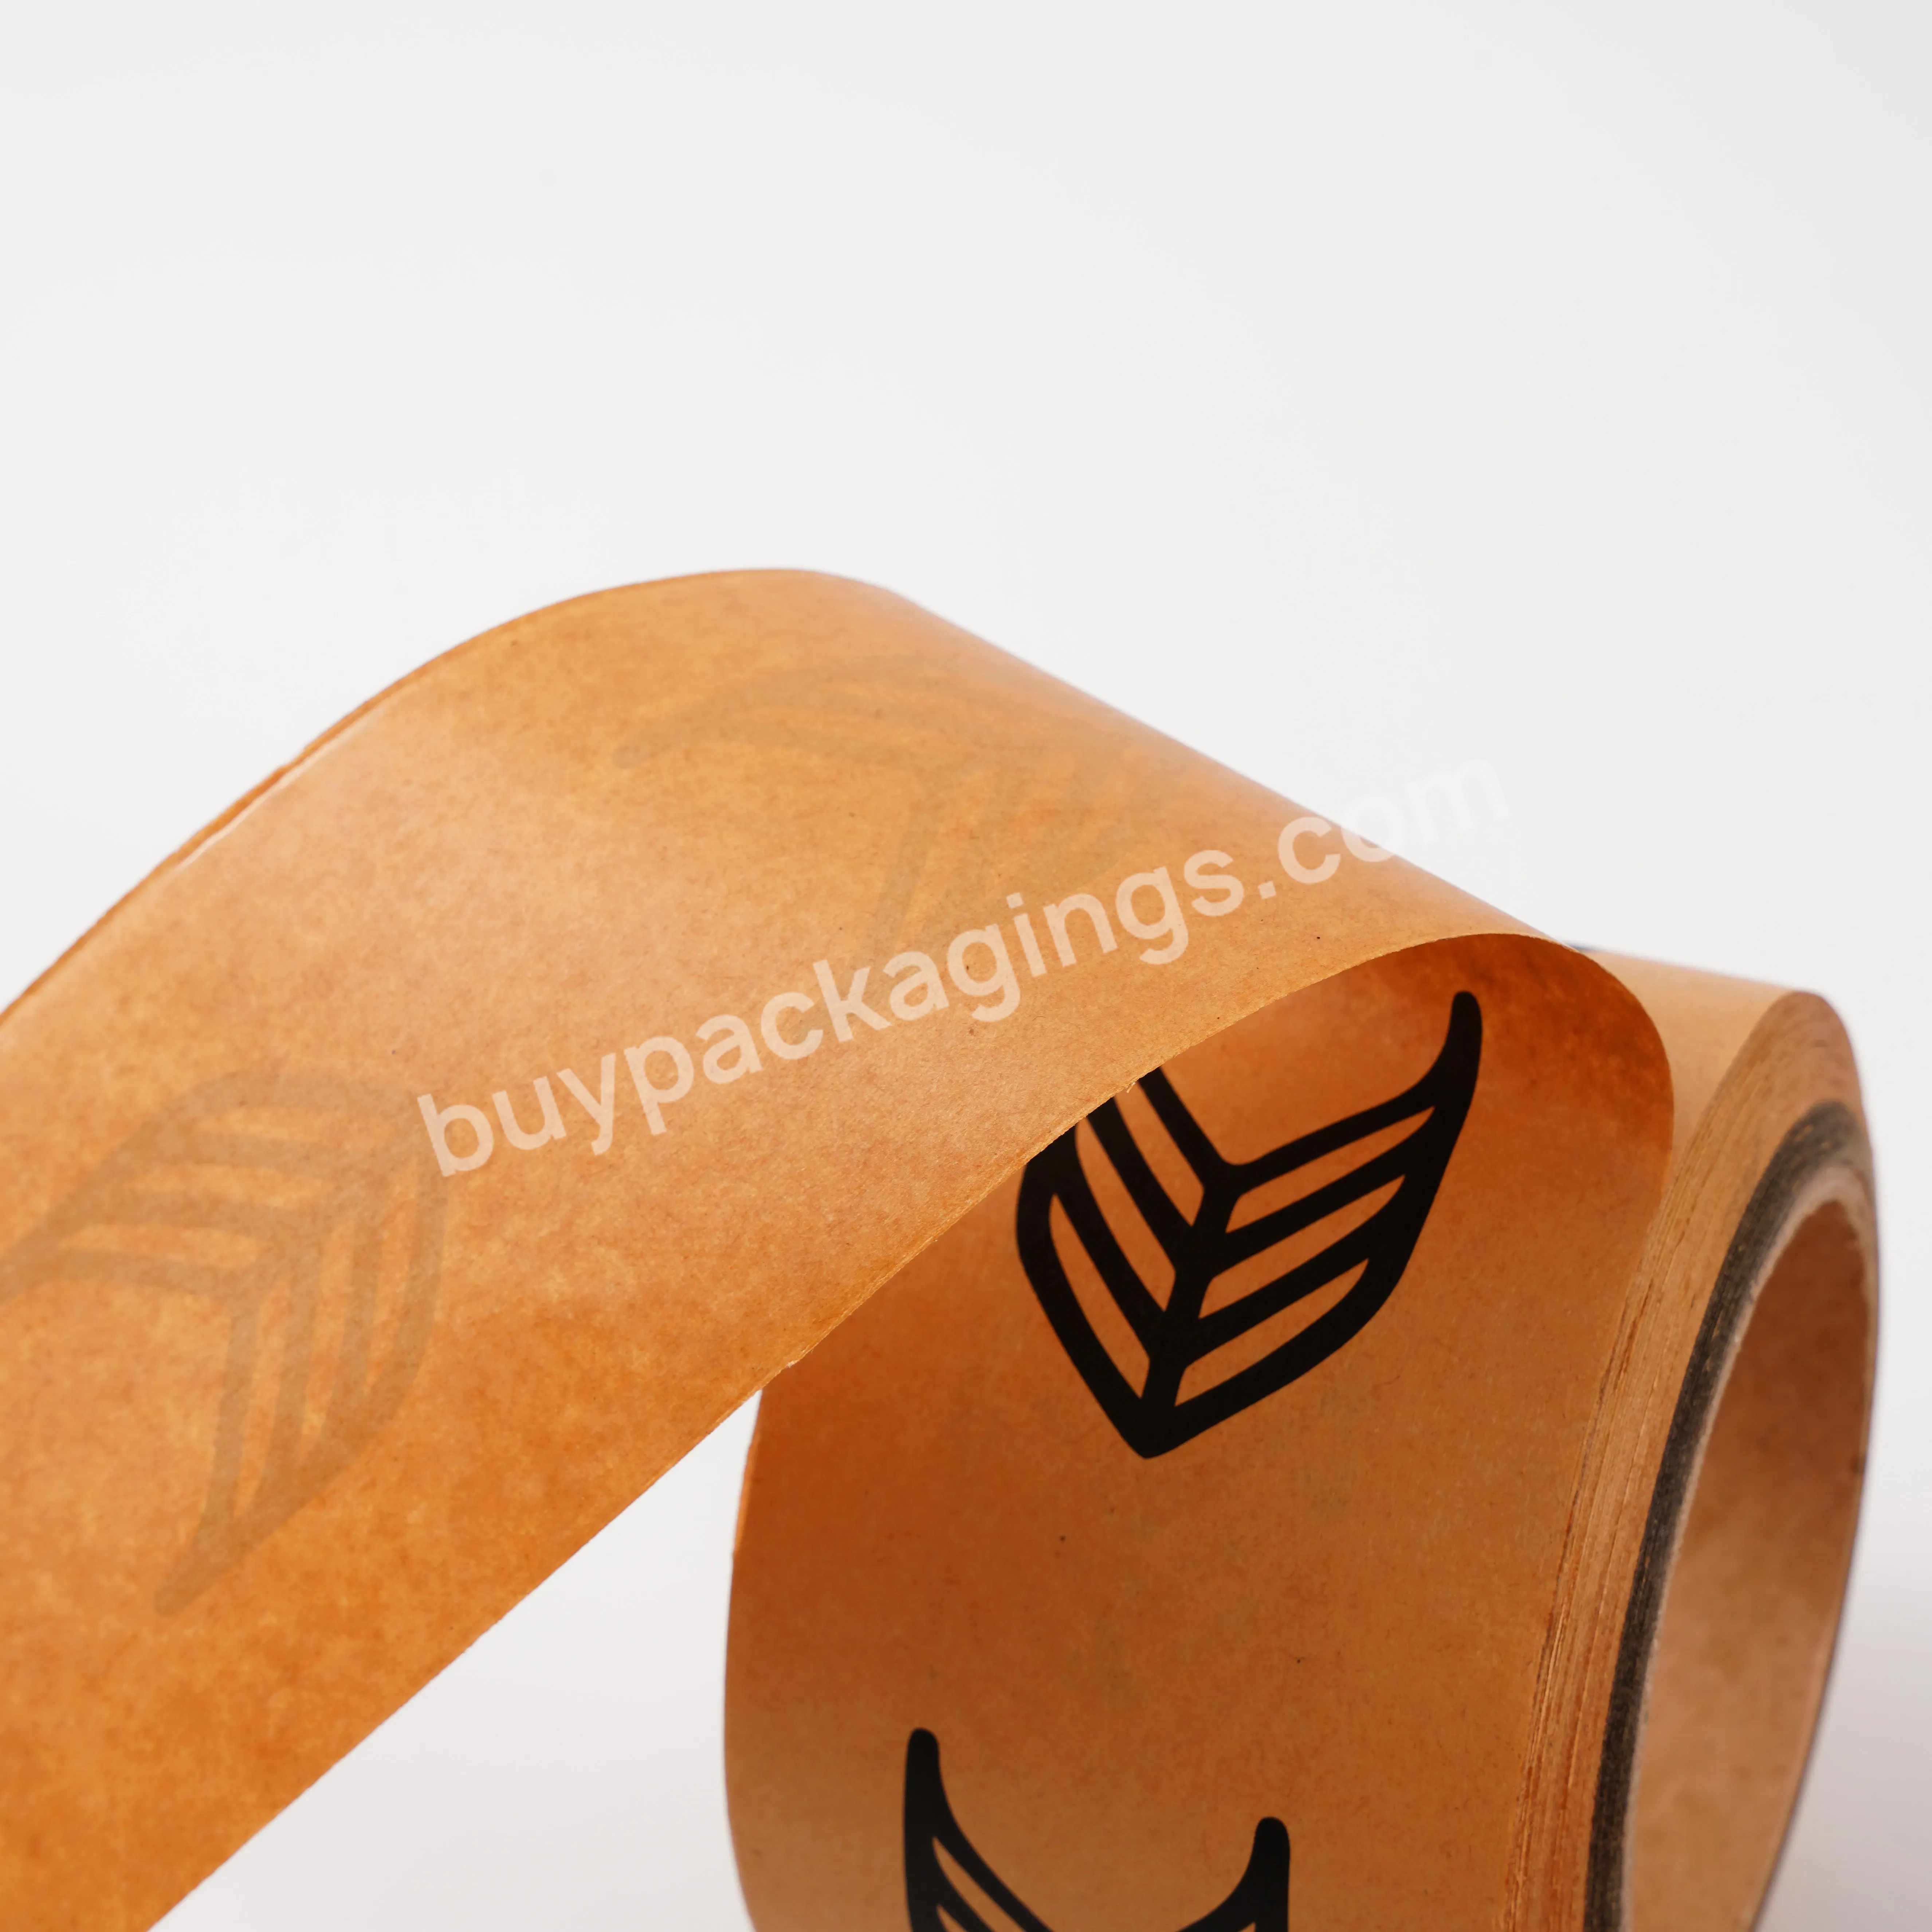 Can Be Customized With Any Logo And Printed With Kraft Paper Tape For Packaging And Sealing - Buy Customizable Tape,Printed Kraft Paper Tape,Kraft Paper Tape.